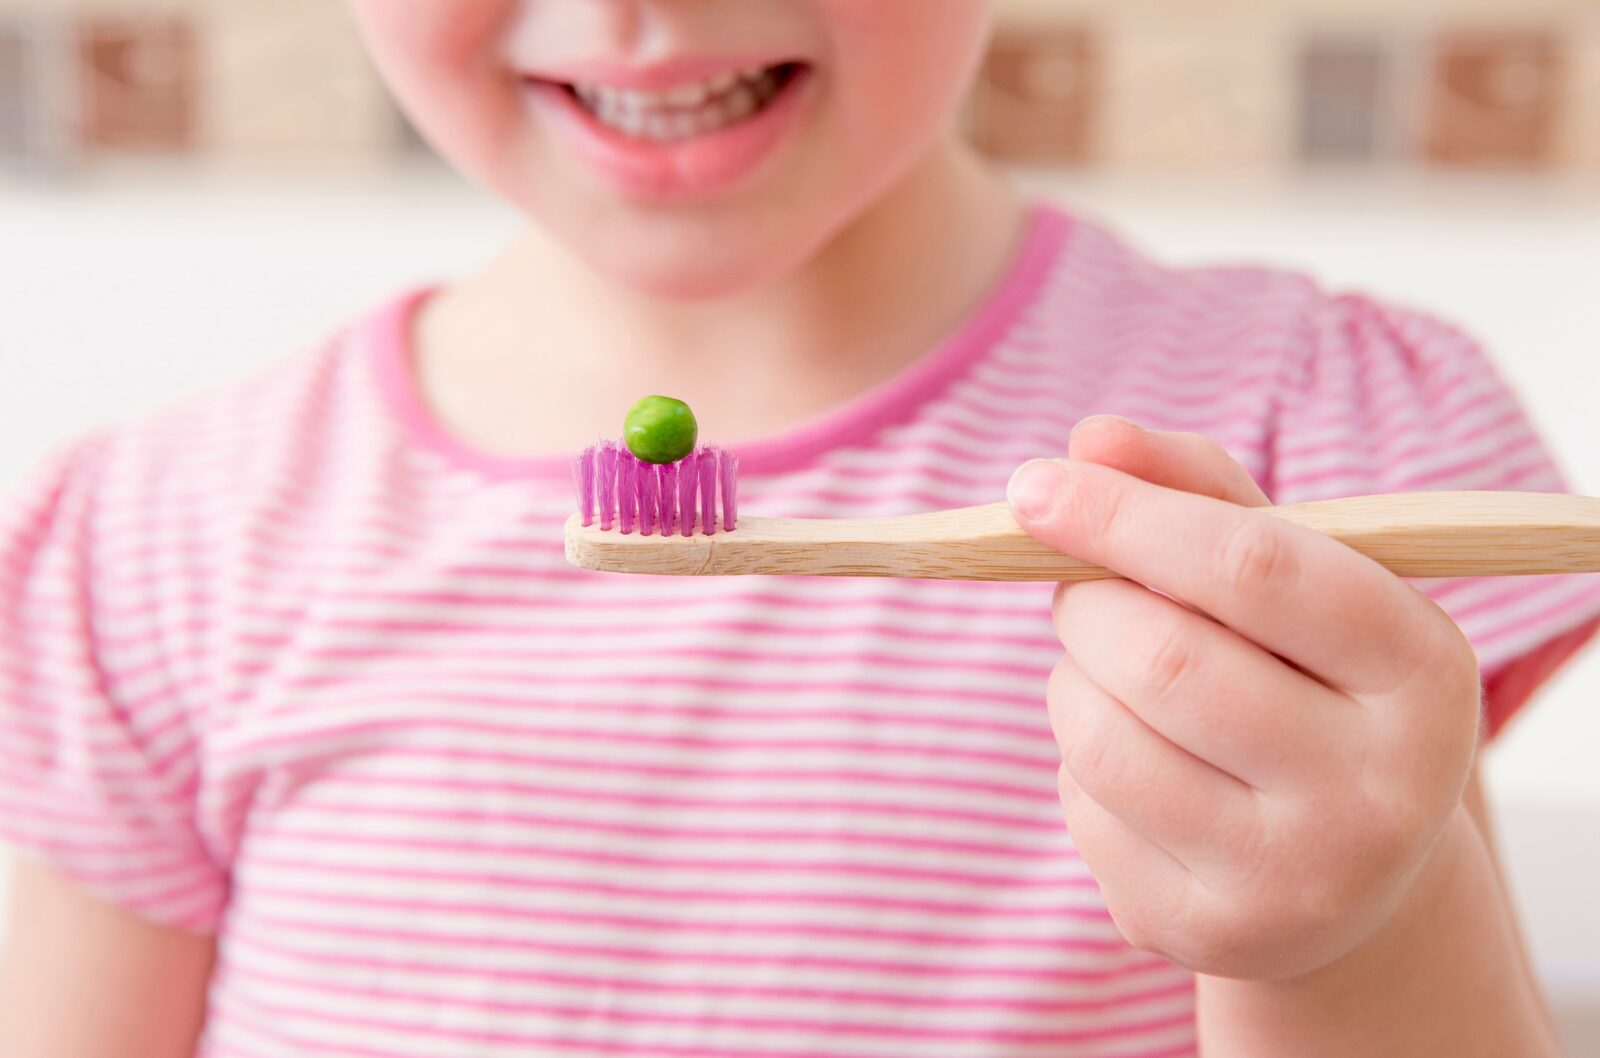 young girl with a pea on her toothbrush to indicate proper toothpaste use